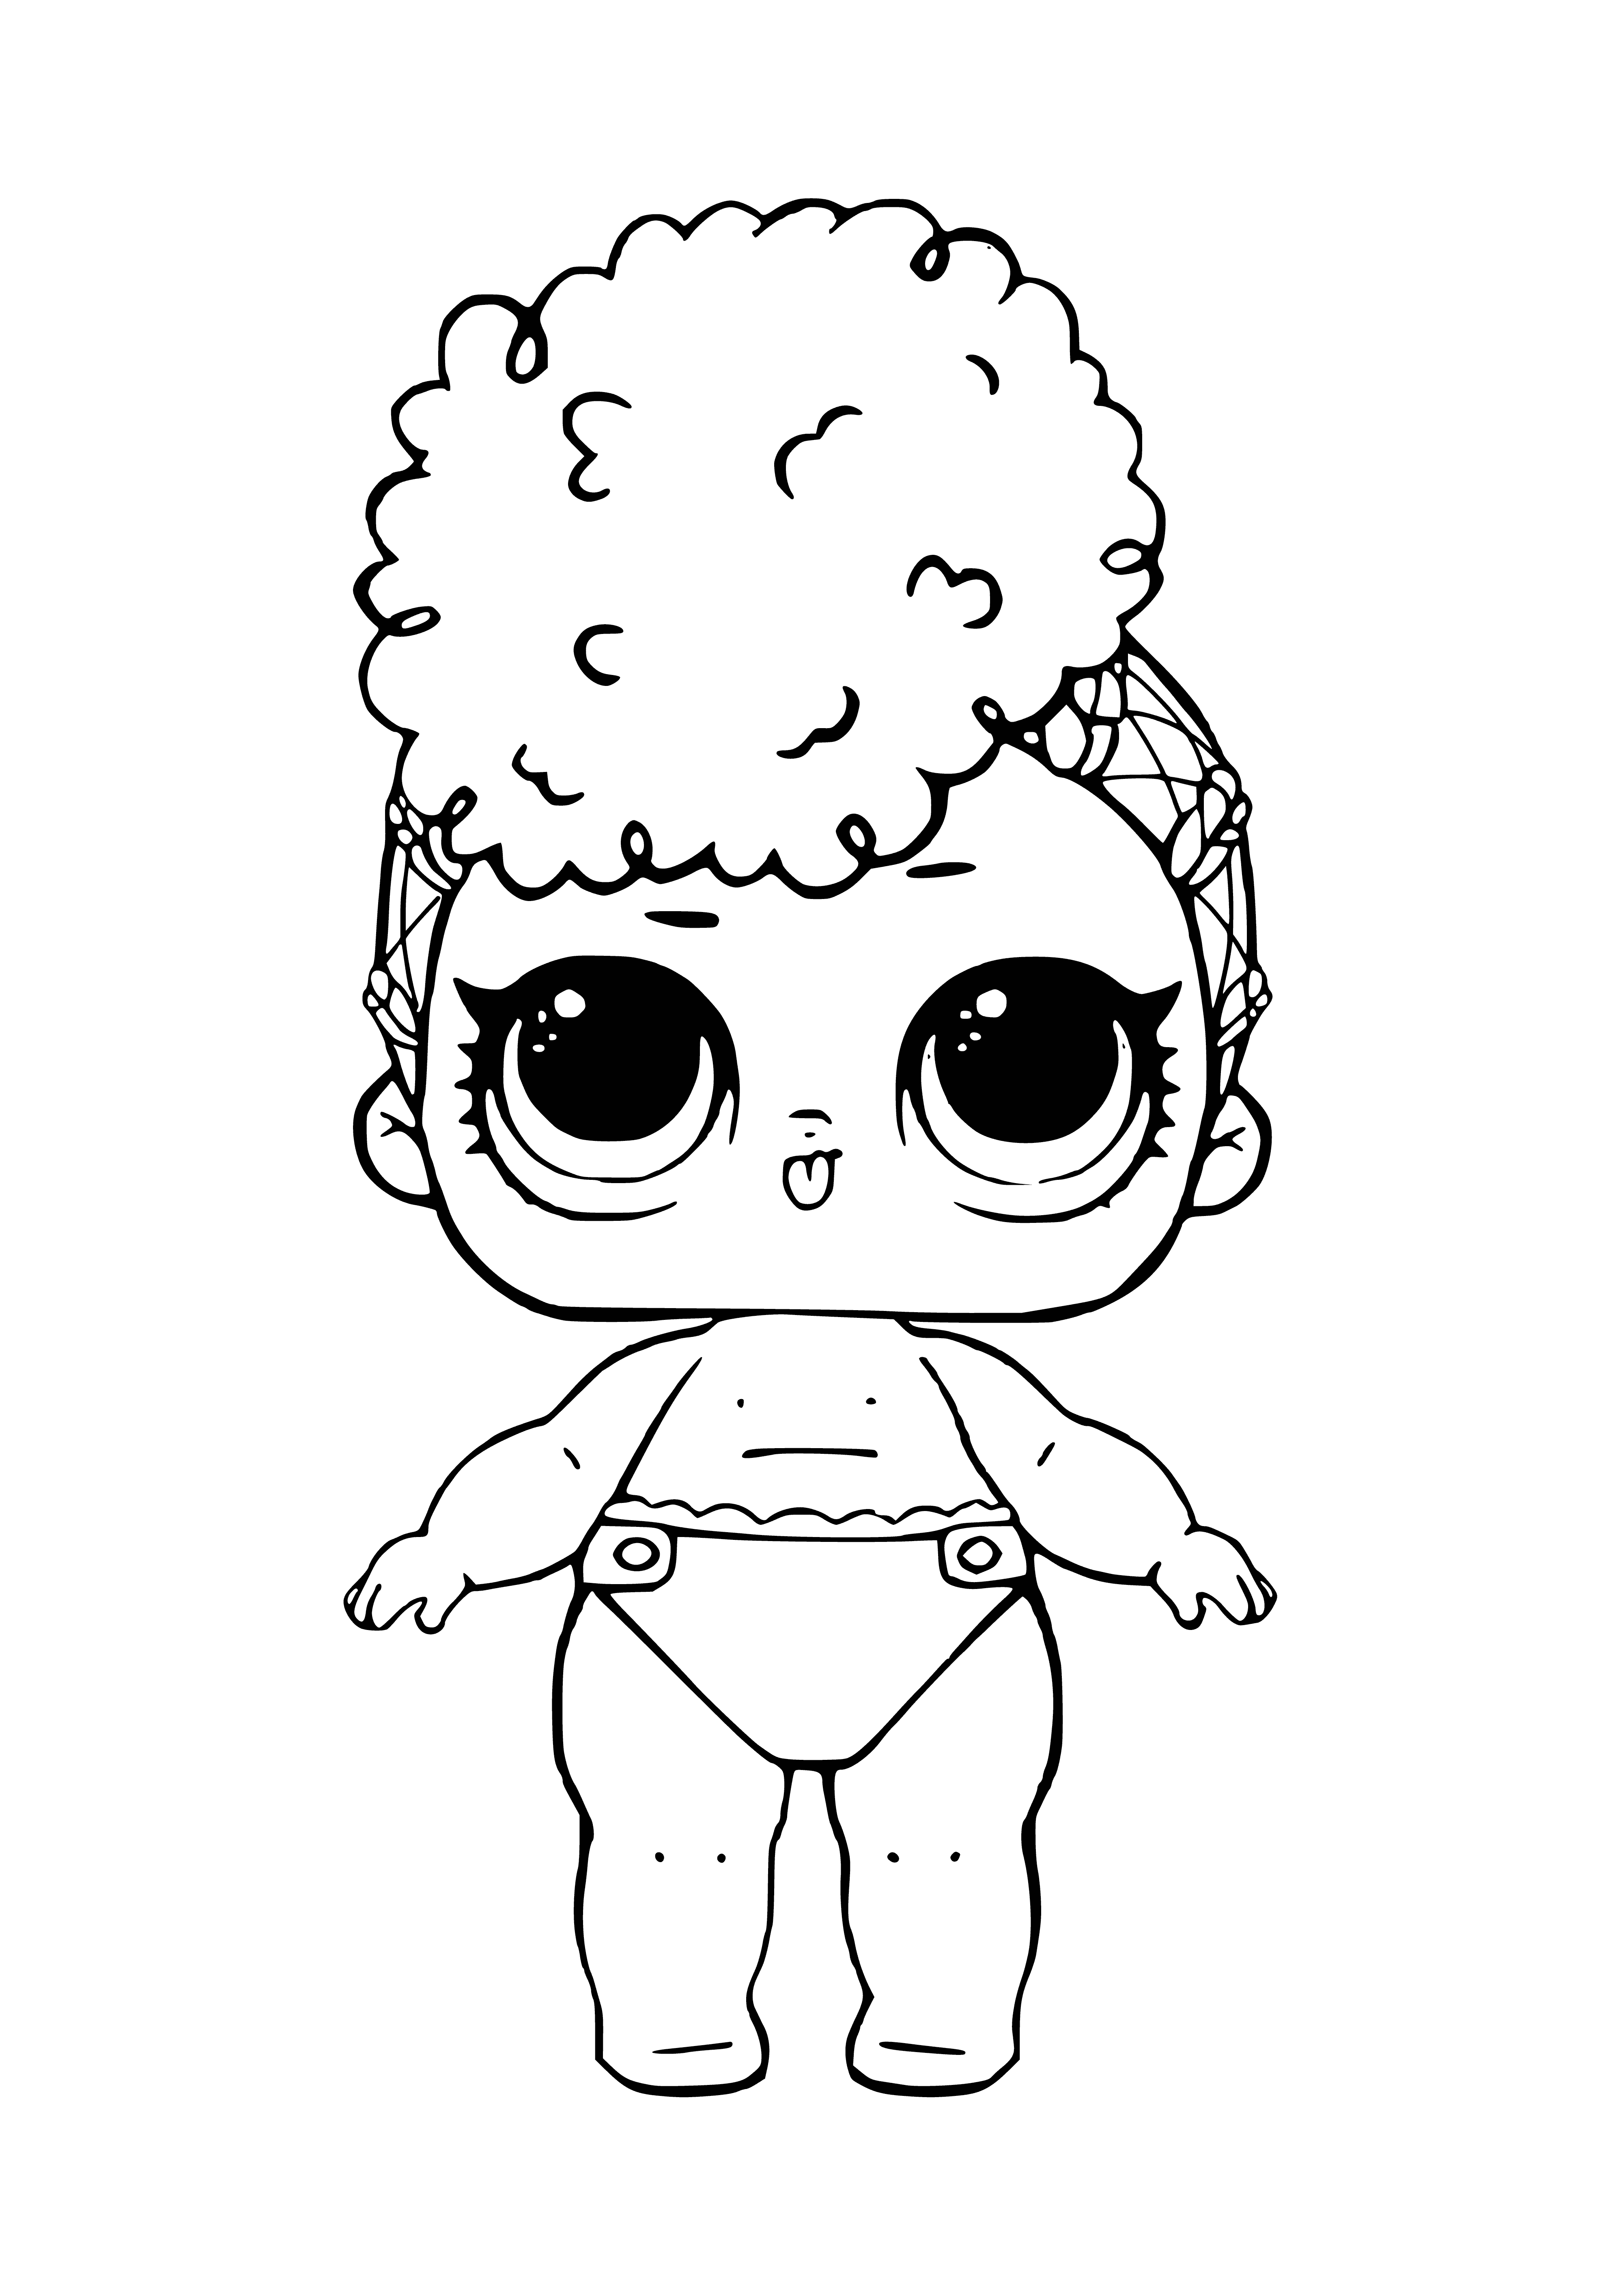 LOL baby Independence coloring page